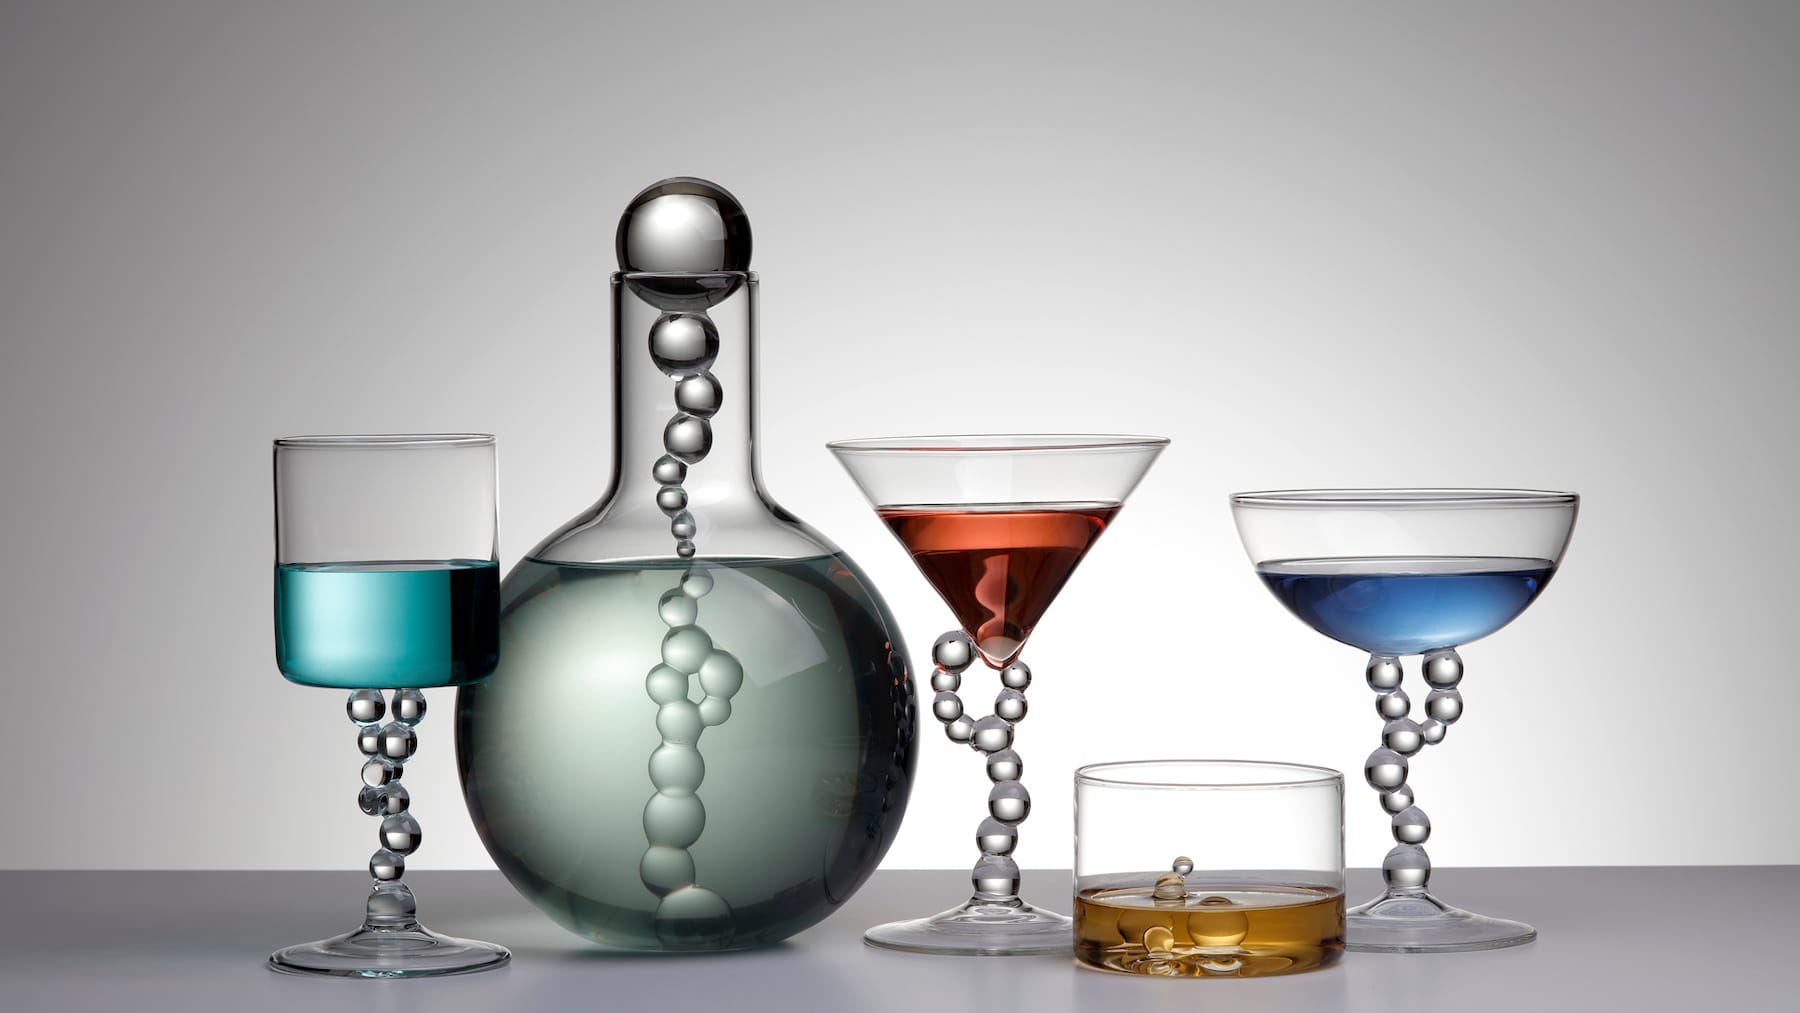 Handmade with Lab-Grade Glass, This Decanter Holds Your Favorite Cocktail Concoctions